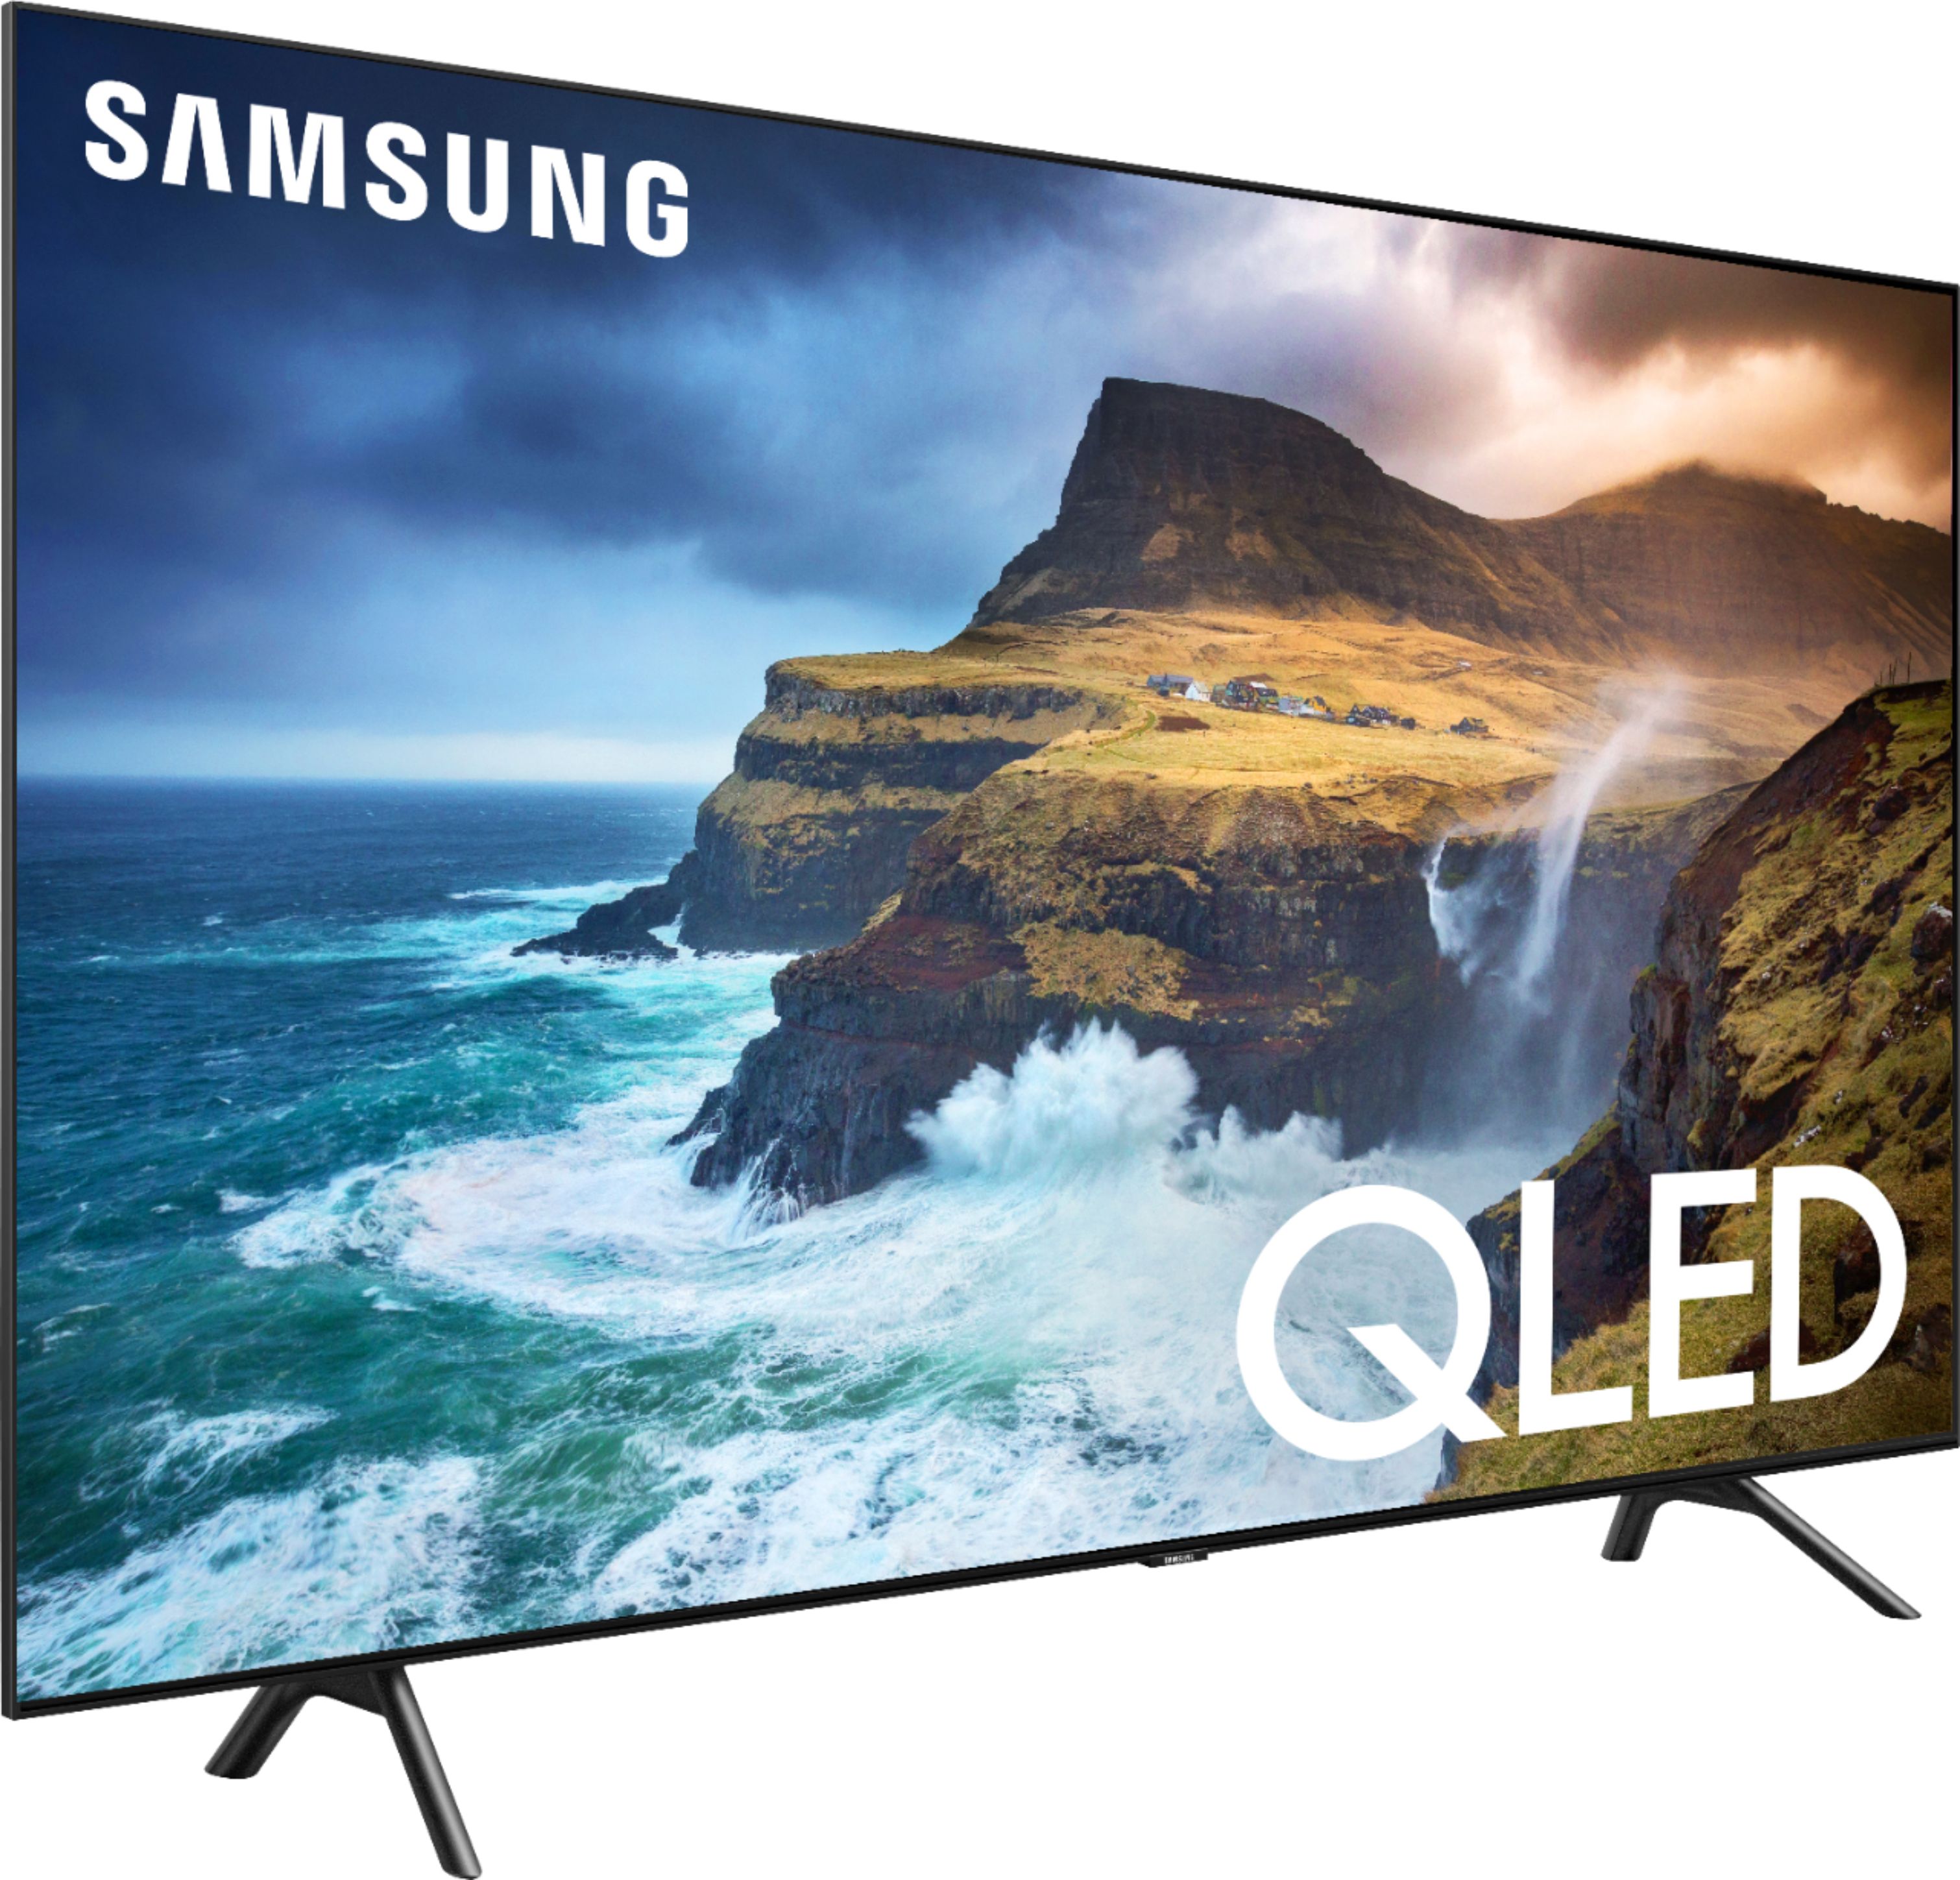 Samsung unveils amazing 85-inch 4K TV with 'floating' design - The Verge